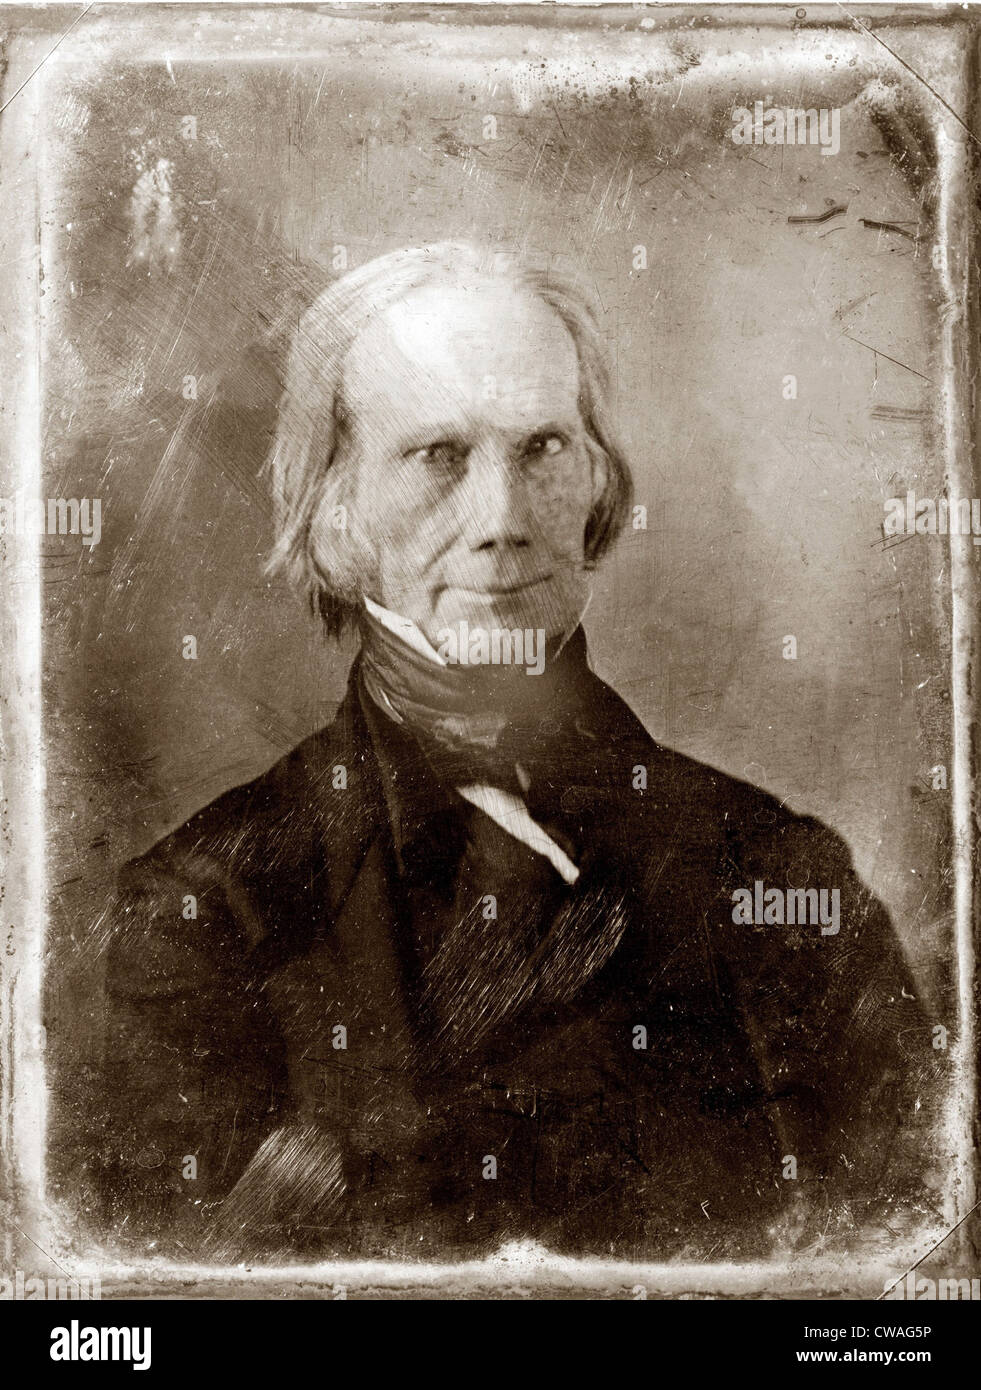 Henry Clay (1777-1852), 1851 dauguerreotype by Matthew Brady.  In his seventies he designed the Compromise of 1850, averting Stock Photo